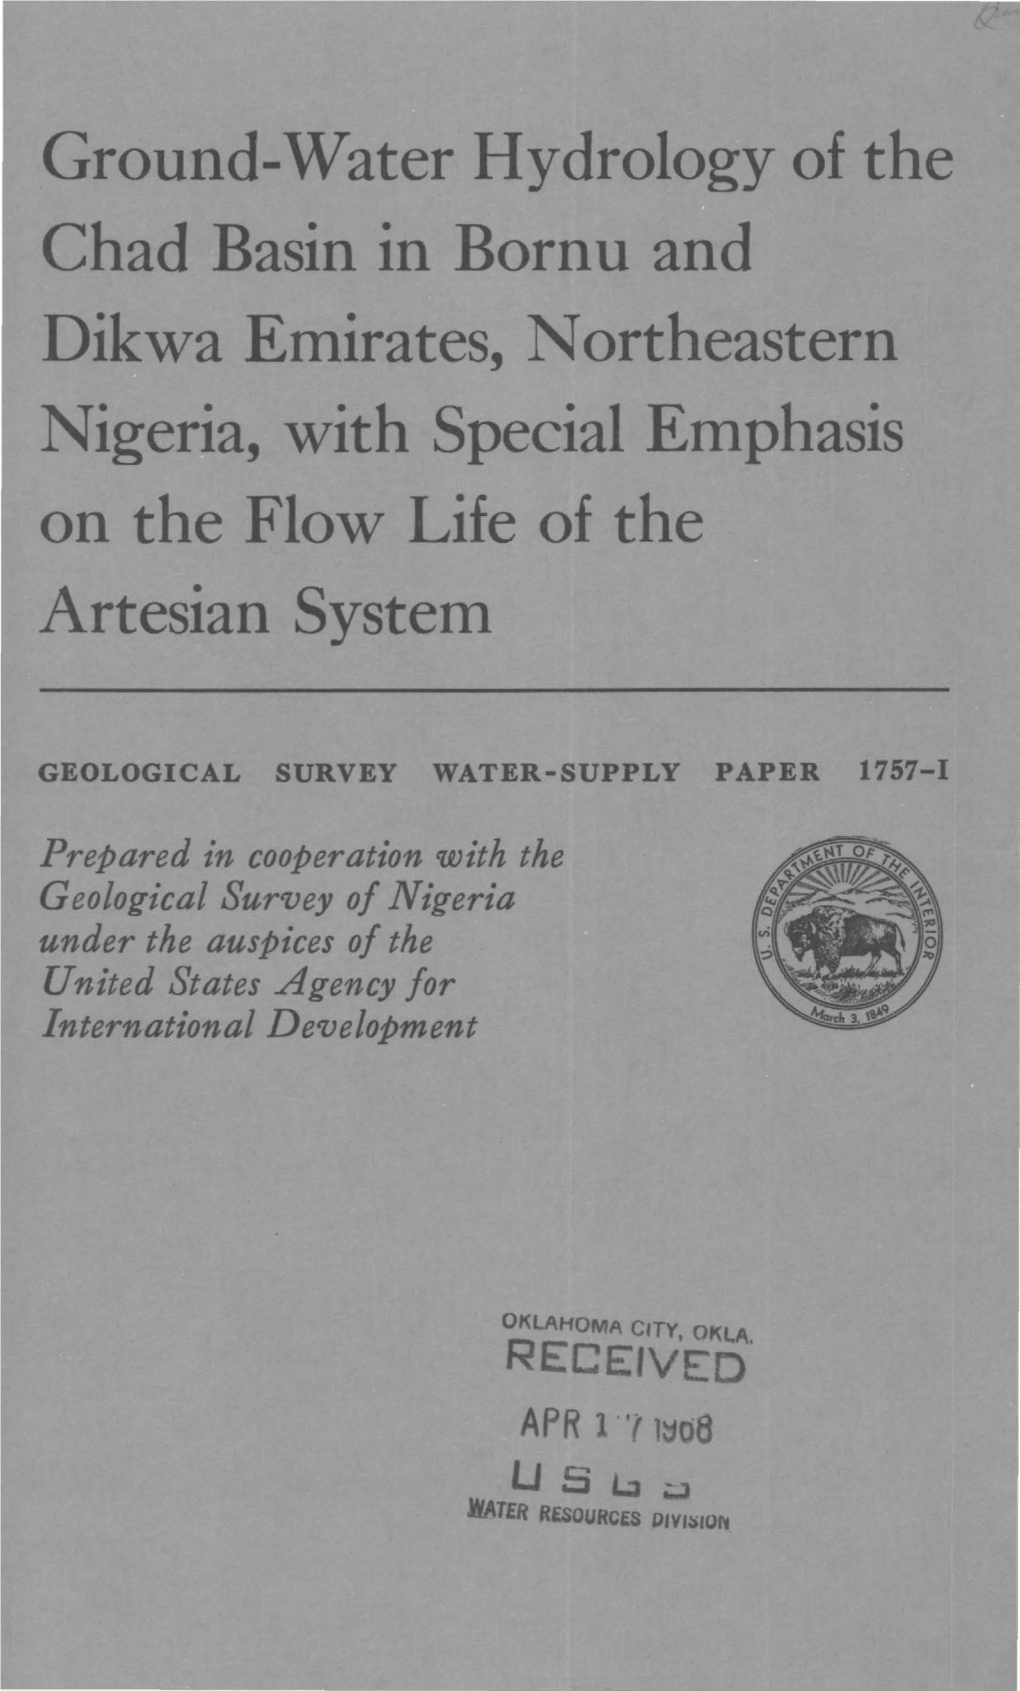 Ground-Water Hydrology of the Chad Basin in Bornu and Dikwa Emirates, Northeastern Nigeria, with Special Emphasis on the Flow Life of the Artesian System